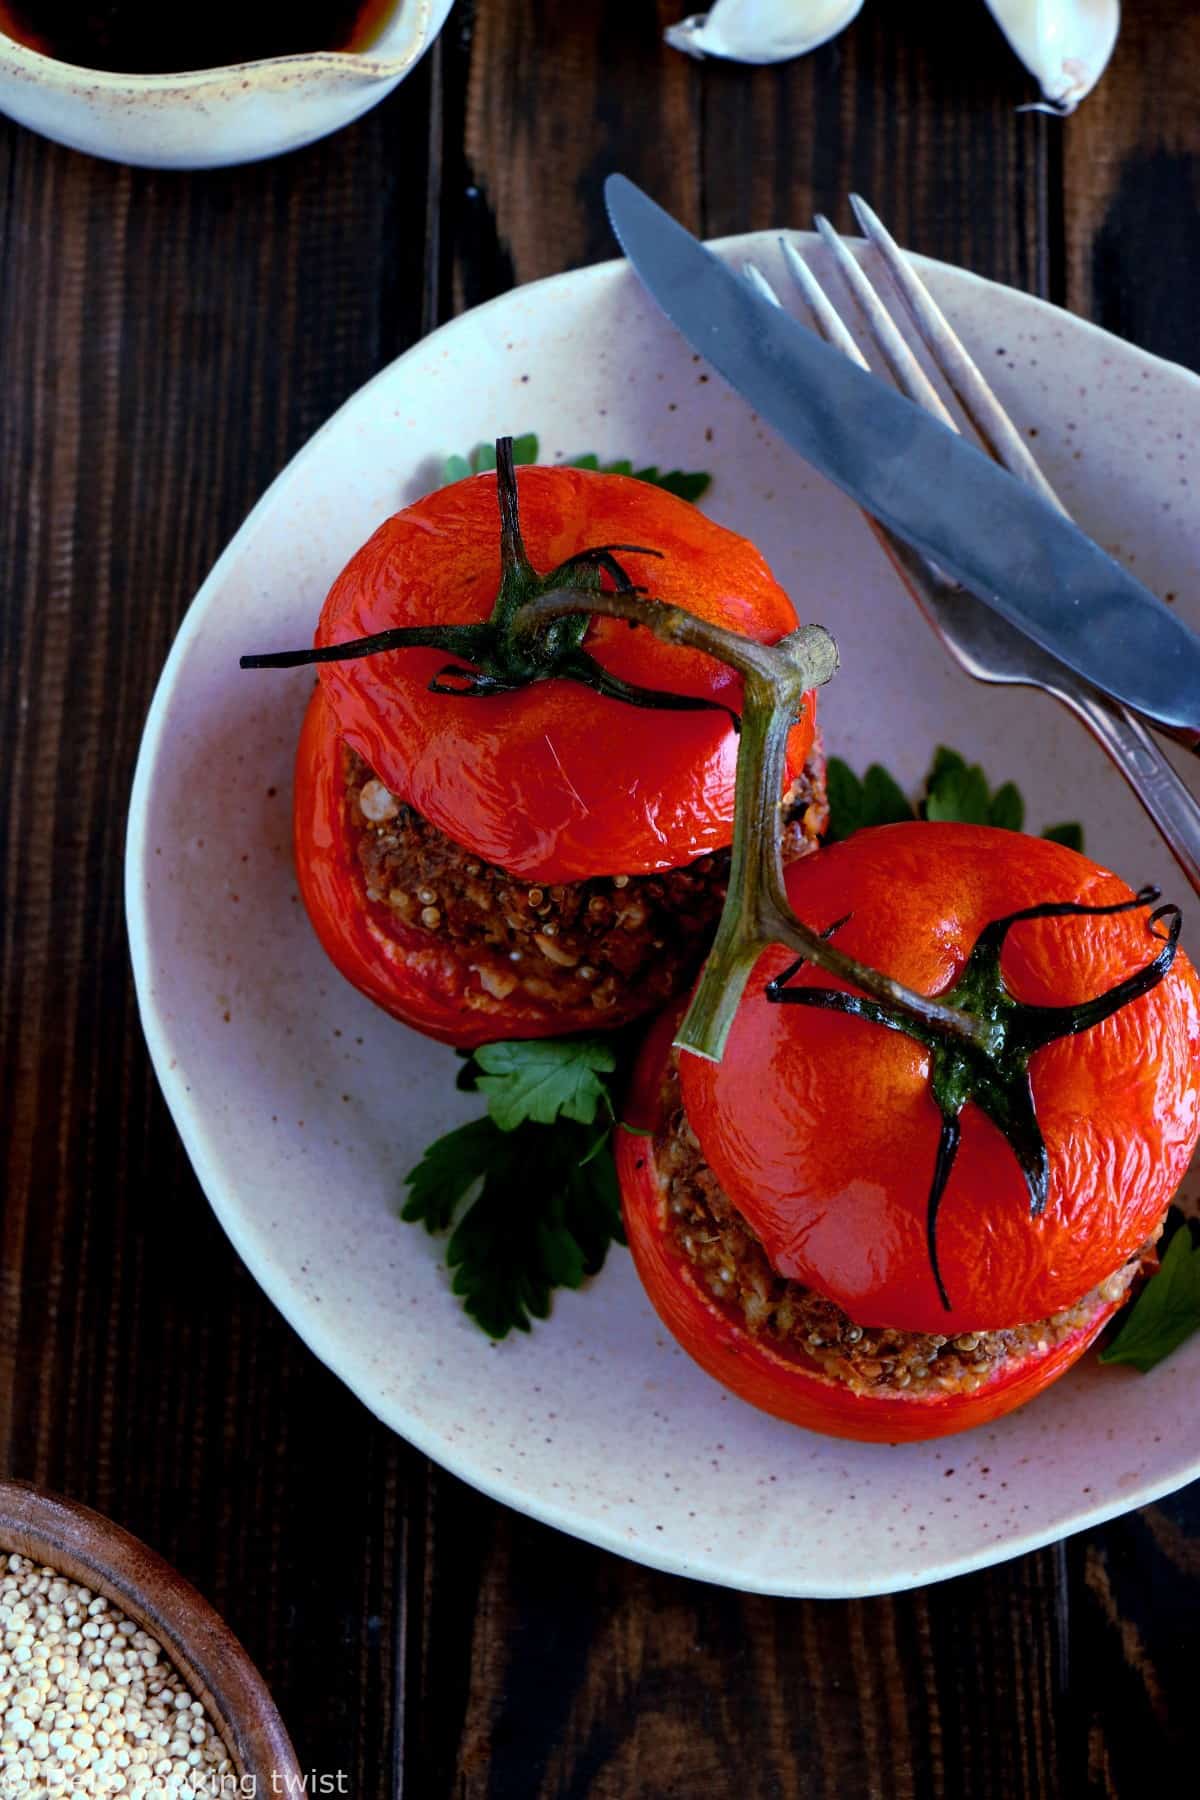 Healthy Vegan Chickpea Stuffed Tomatoes. Healthy vegan chickpea stuffed tomatoes make a delicious hearty summer dish, bursting with juicy tomatoes and packed with nutritious ingredients. A beautiful twist to the traditional French dish "tomates farcies".